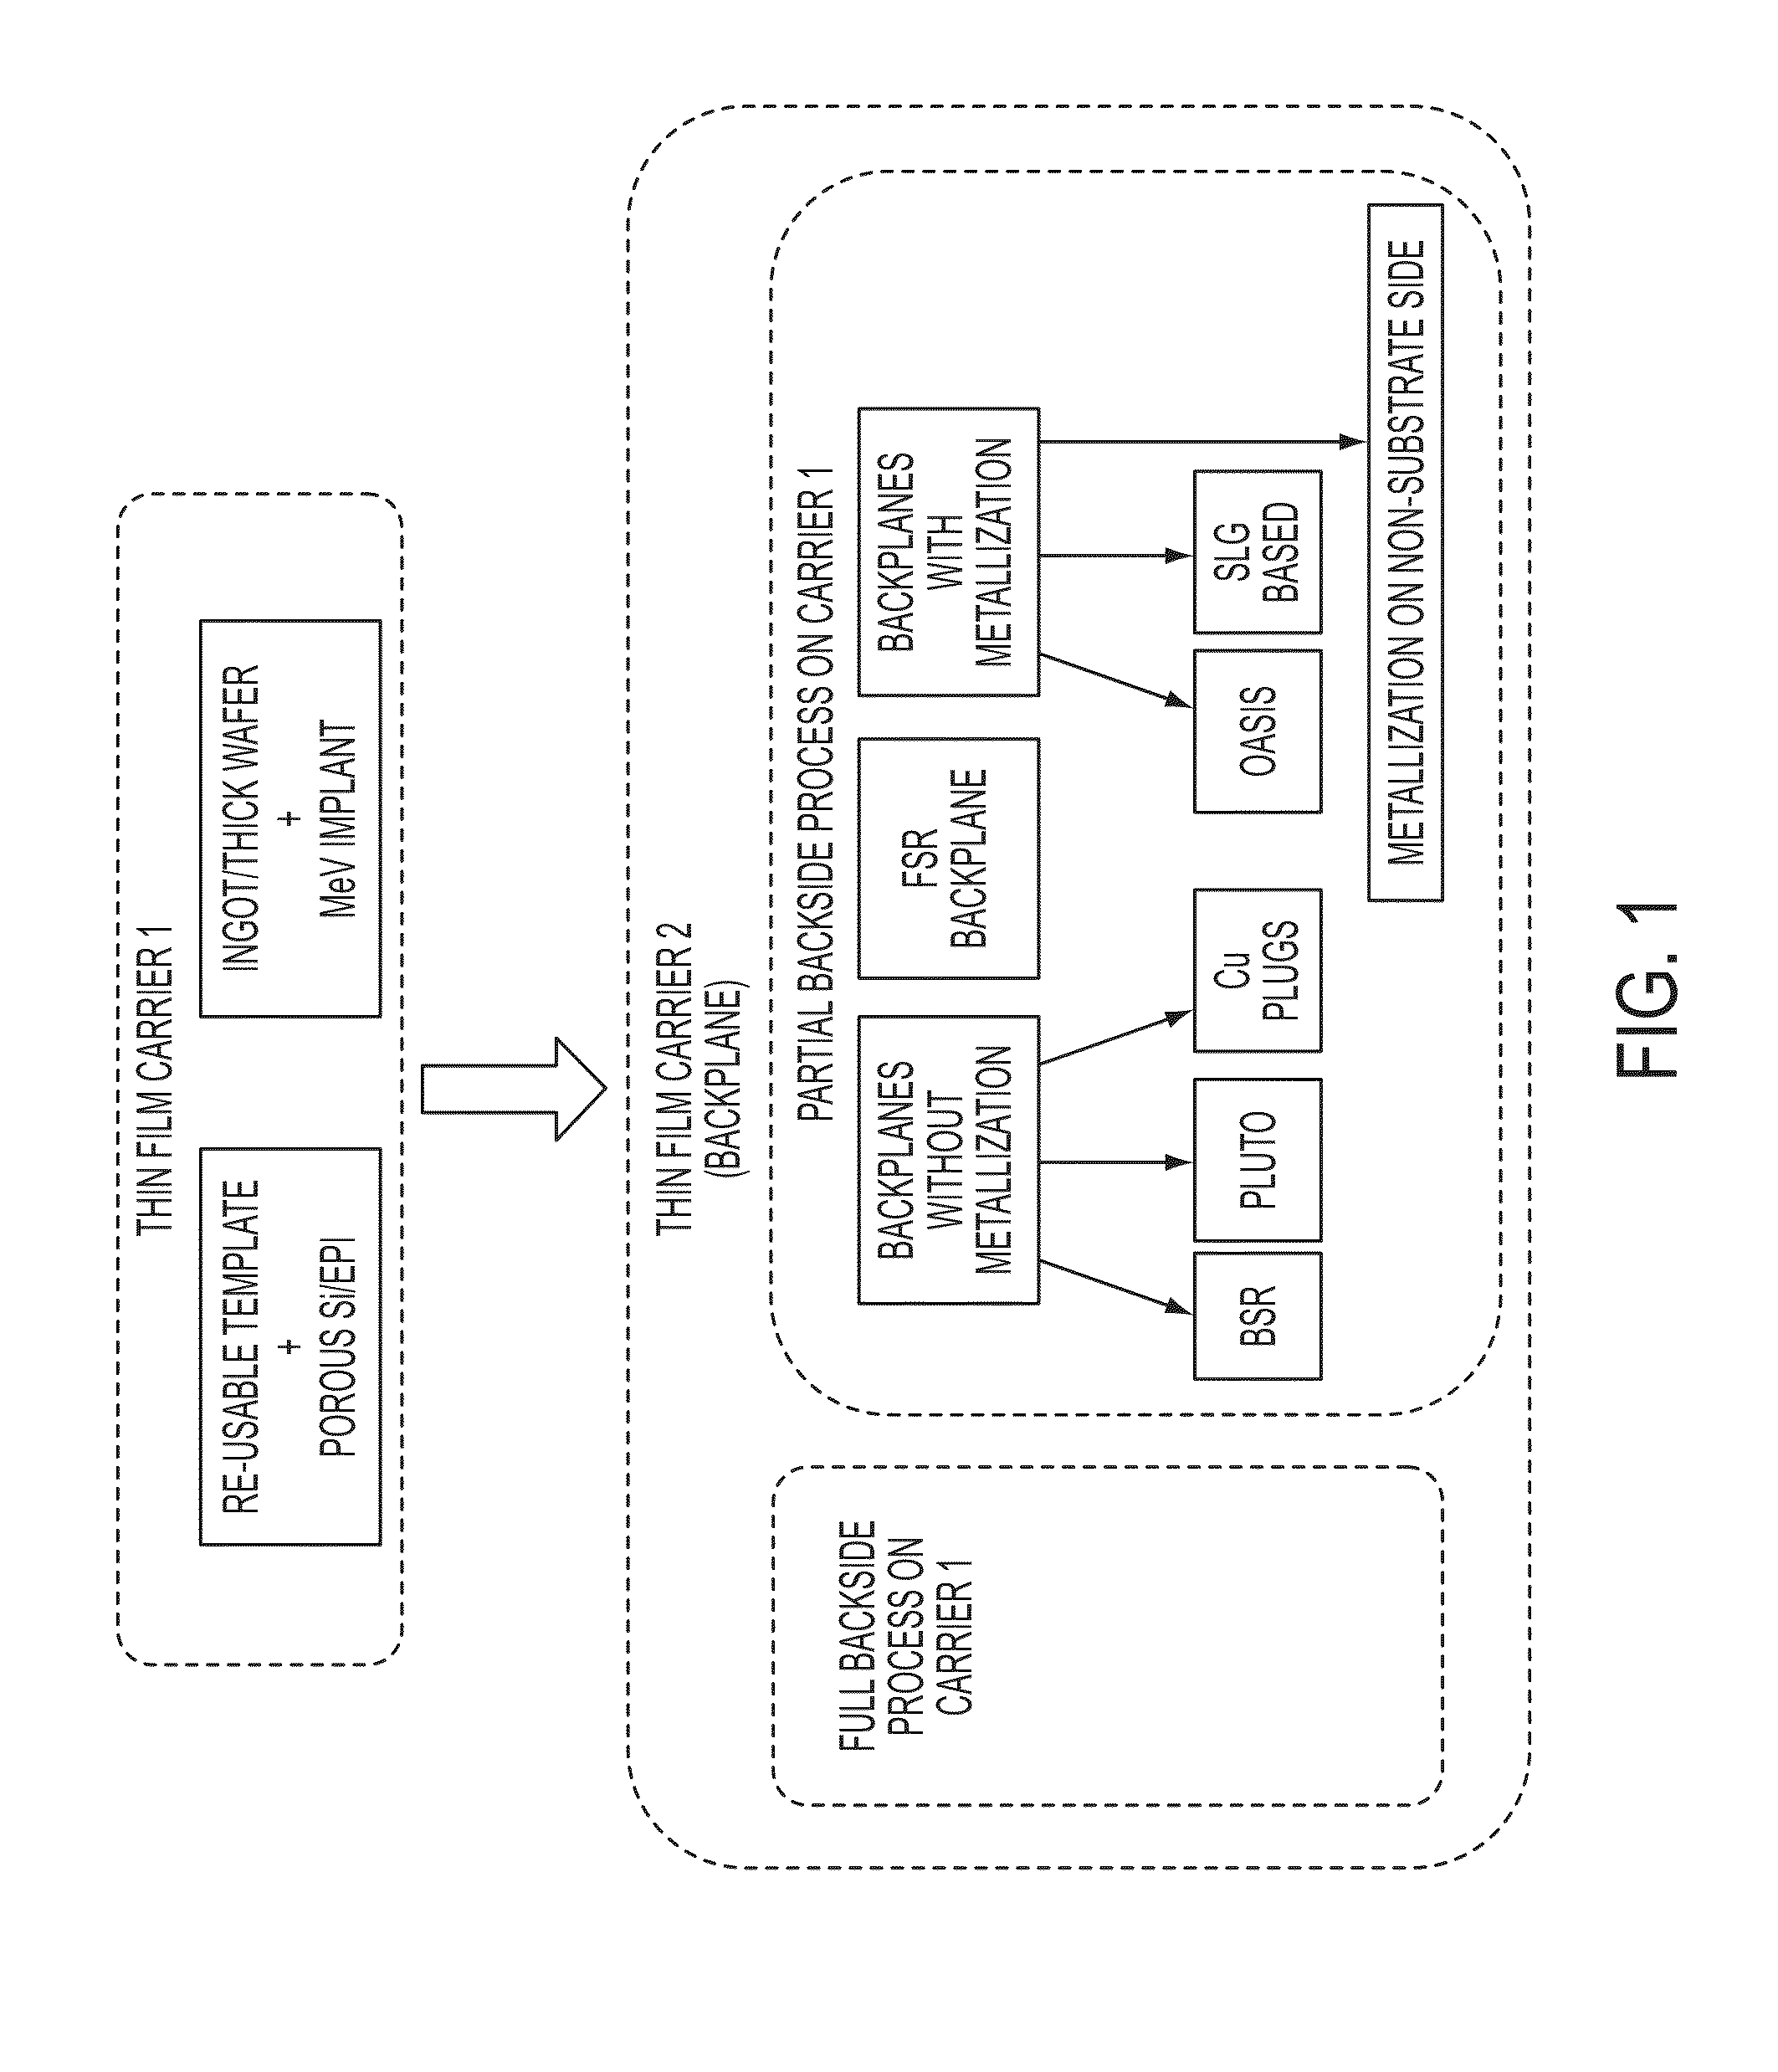 High-efficiency solar photovoltaic cells and modules using thin crystalline semiconductor absorbers